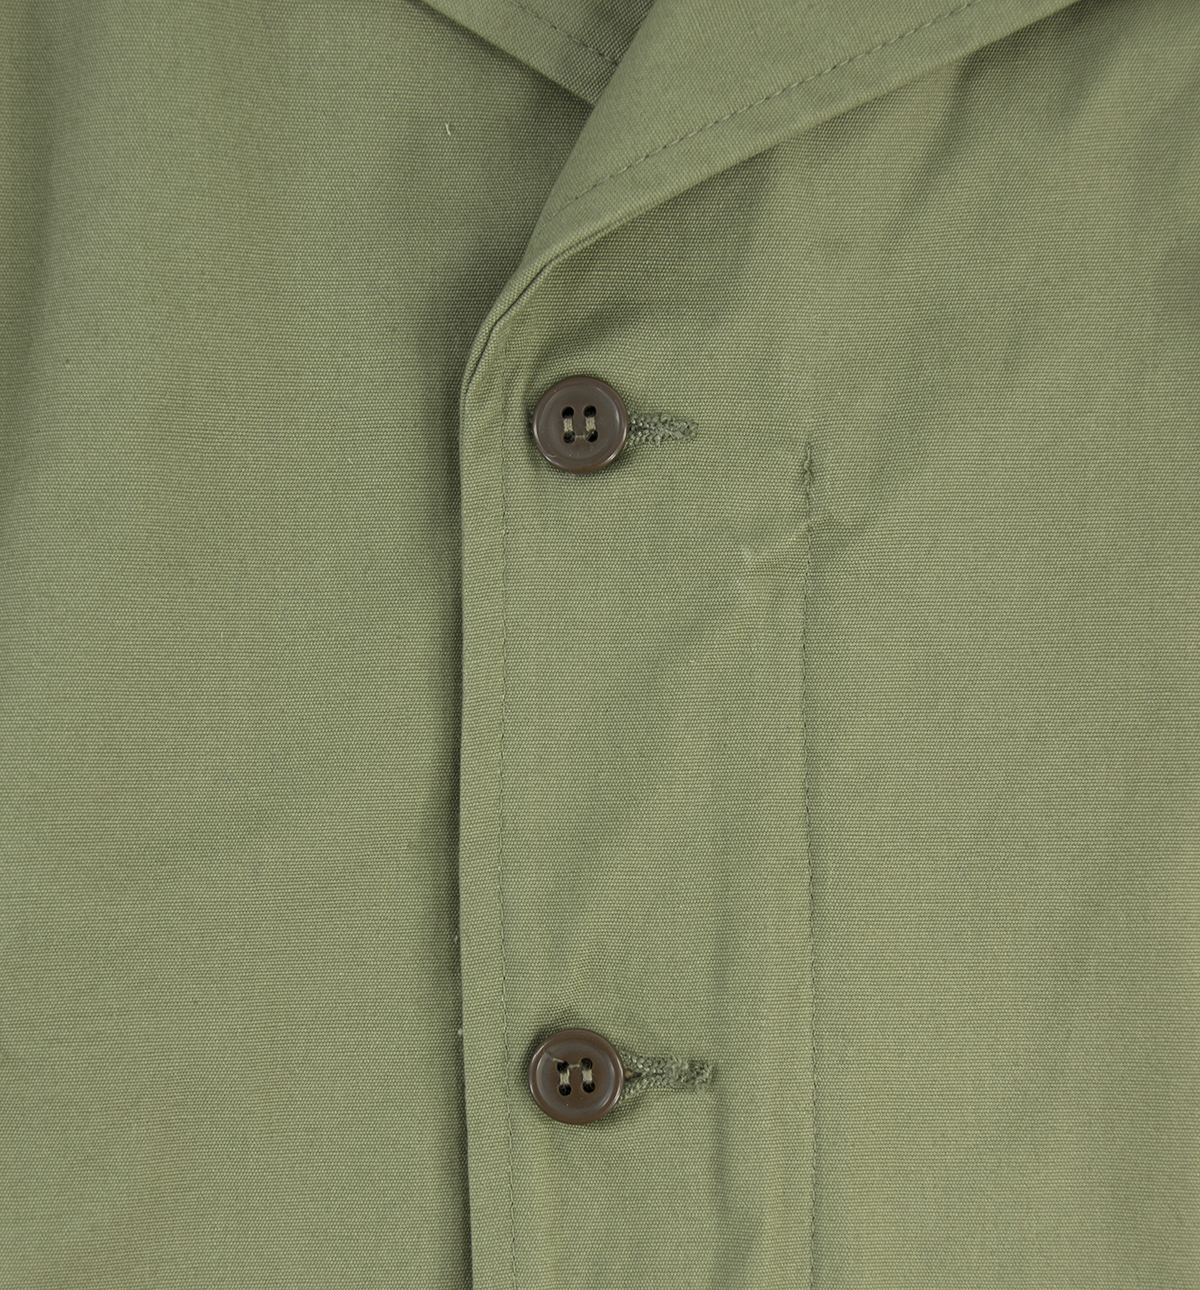 Reproduction M41 Field Jacket Buttons